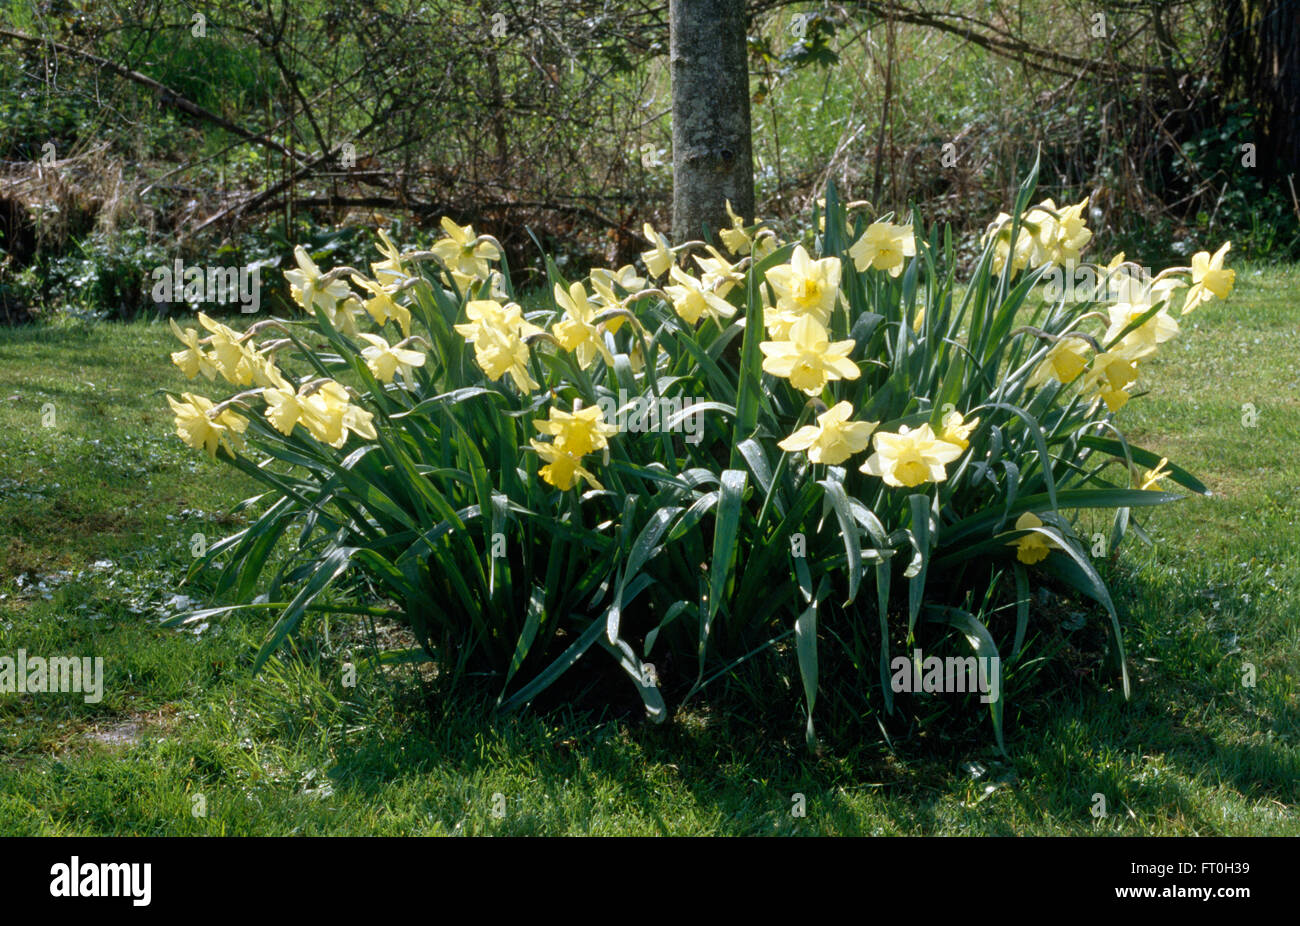 Close-up of a clump of pale yellow daffodils Stock Photo